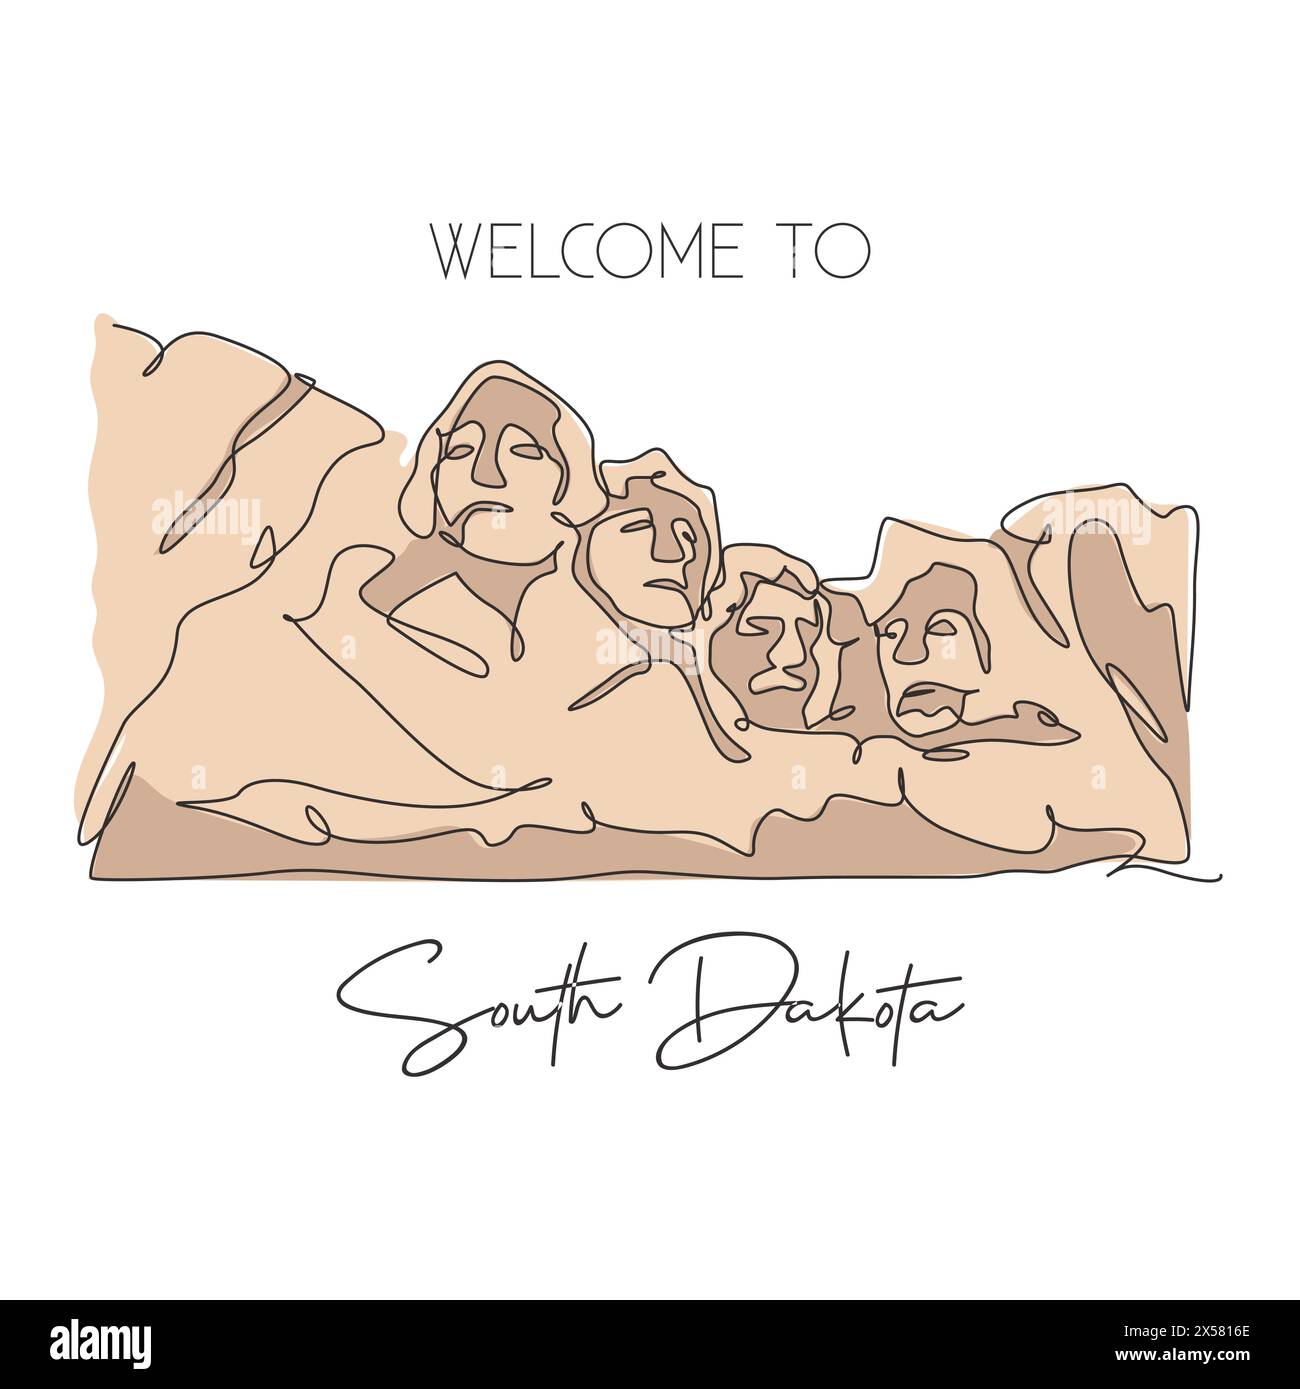 Single continuous line drawing Mount Rushmore National Memorial landmark. Famous place in South Dakota, USA. Travel tour home wall decor poster print. Stock Vector